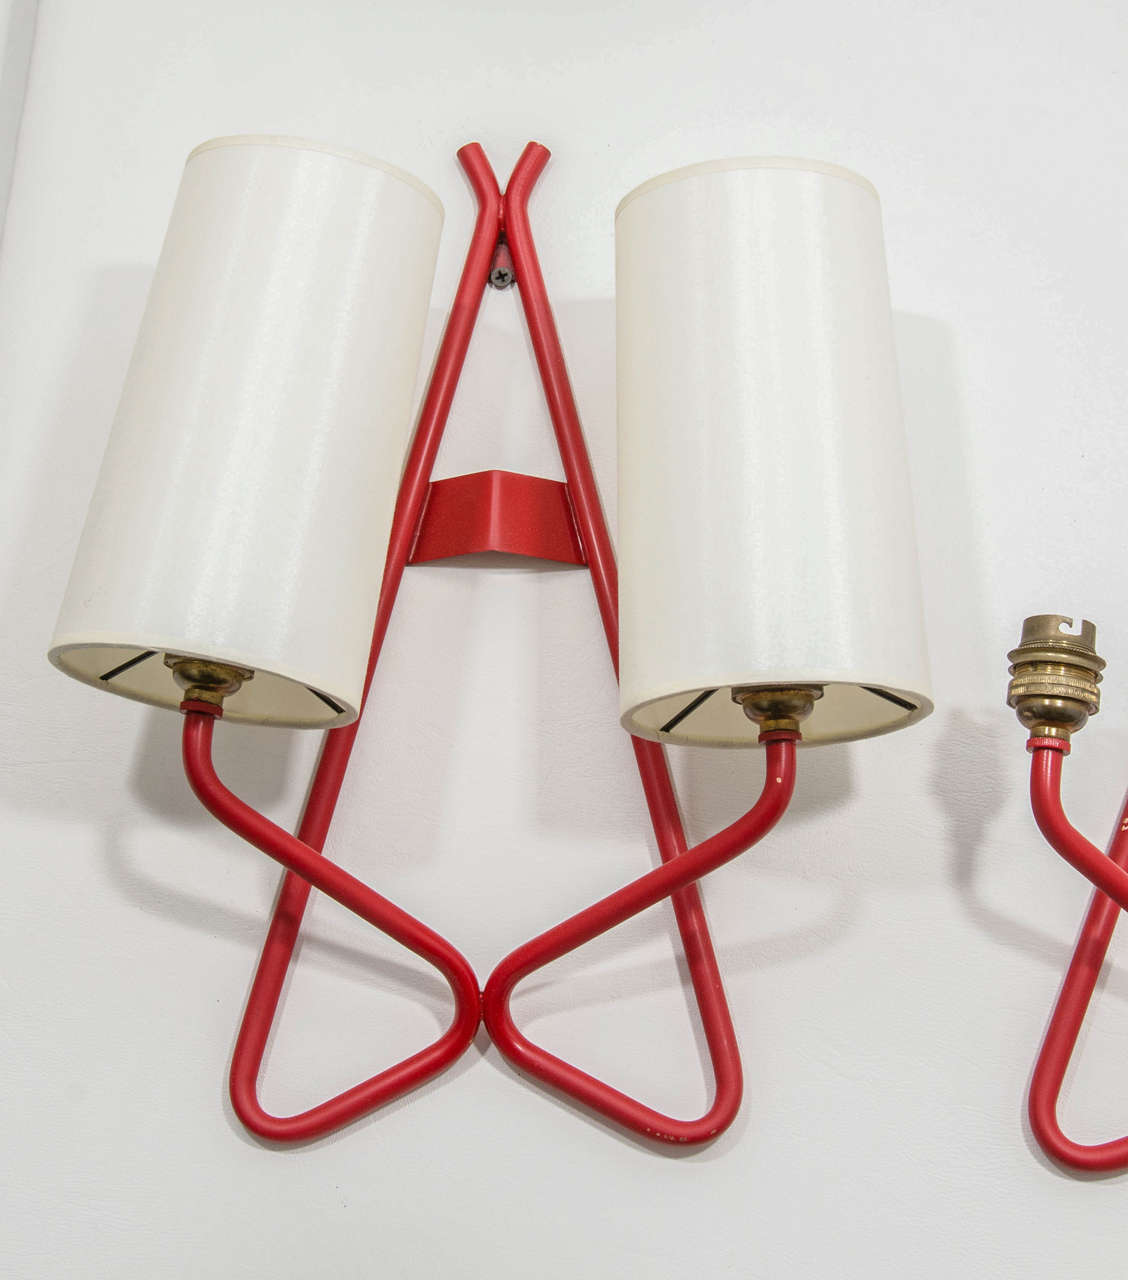 Pair of vermilion iron sconces in the manner of Jean Royere,. Bayonet sockets with silk shades